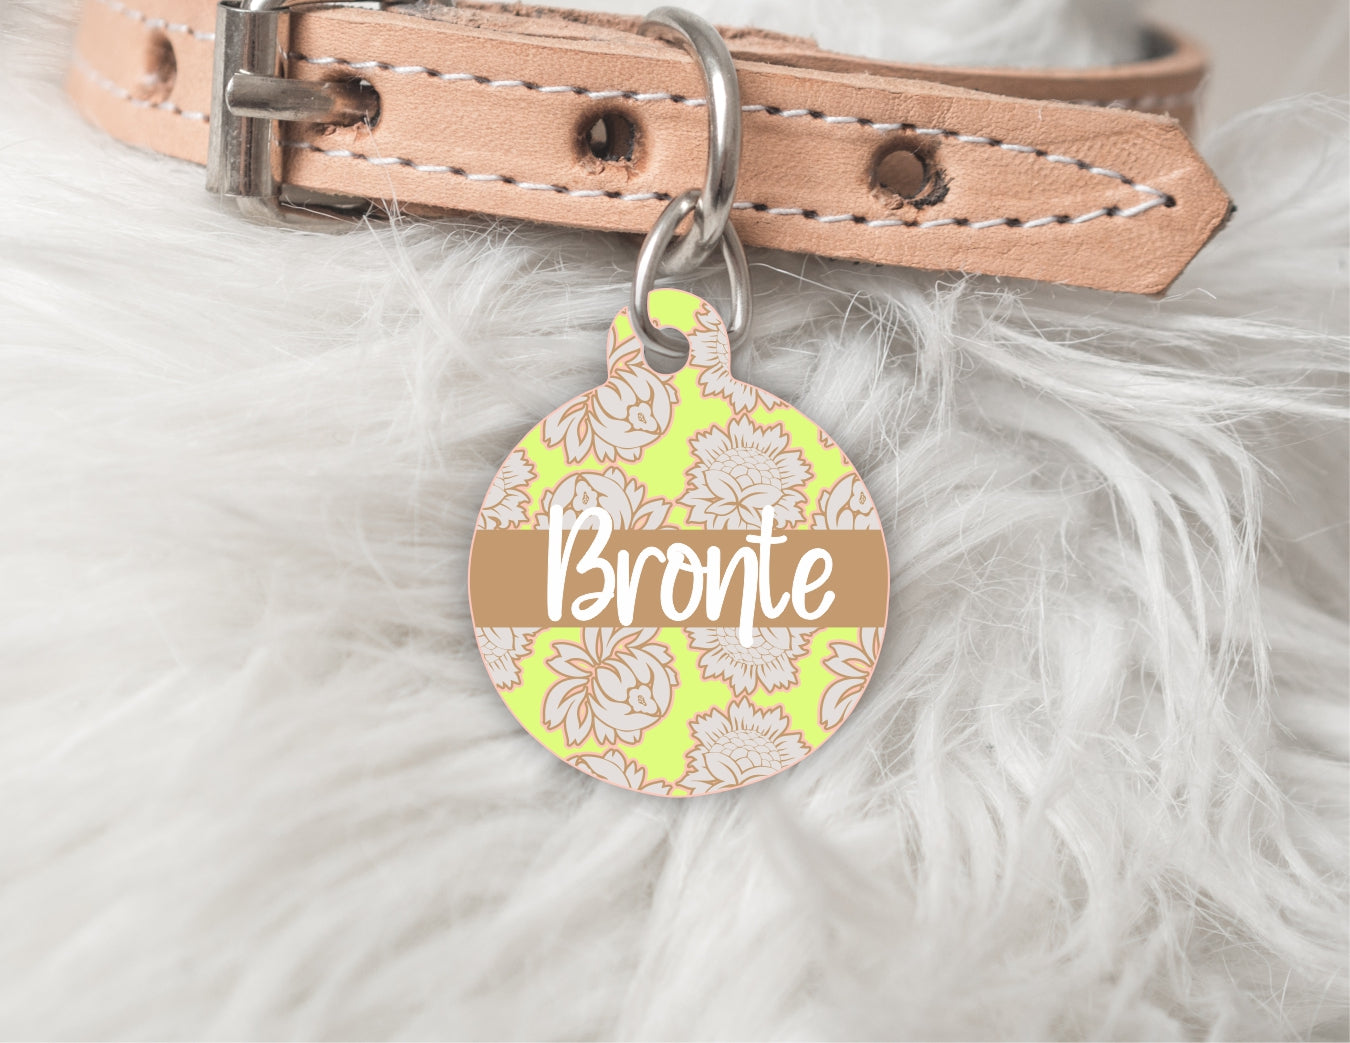 Pup Island Bronte summer collection - Harness, Collar, Lead, Poop Bag &amp; Pet ID tag